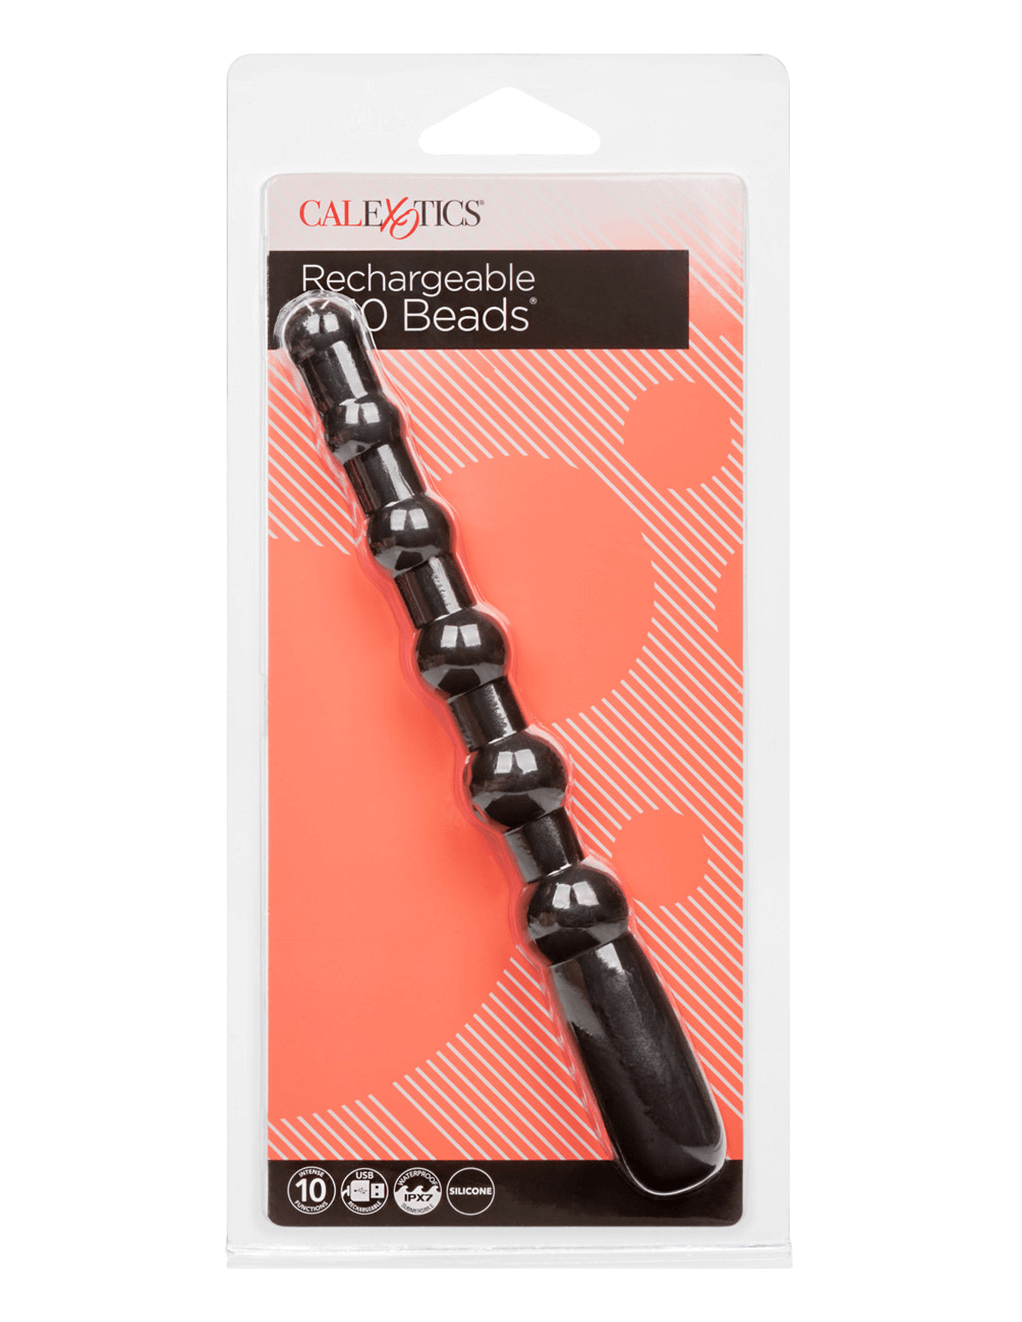 Rechargeable X-10 Beads - Box Front